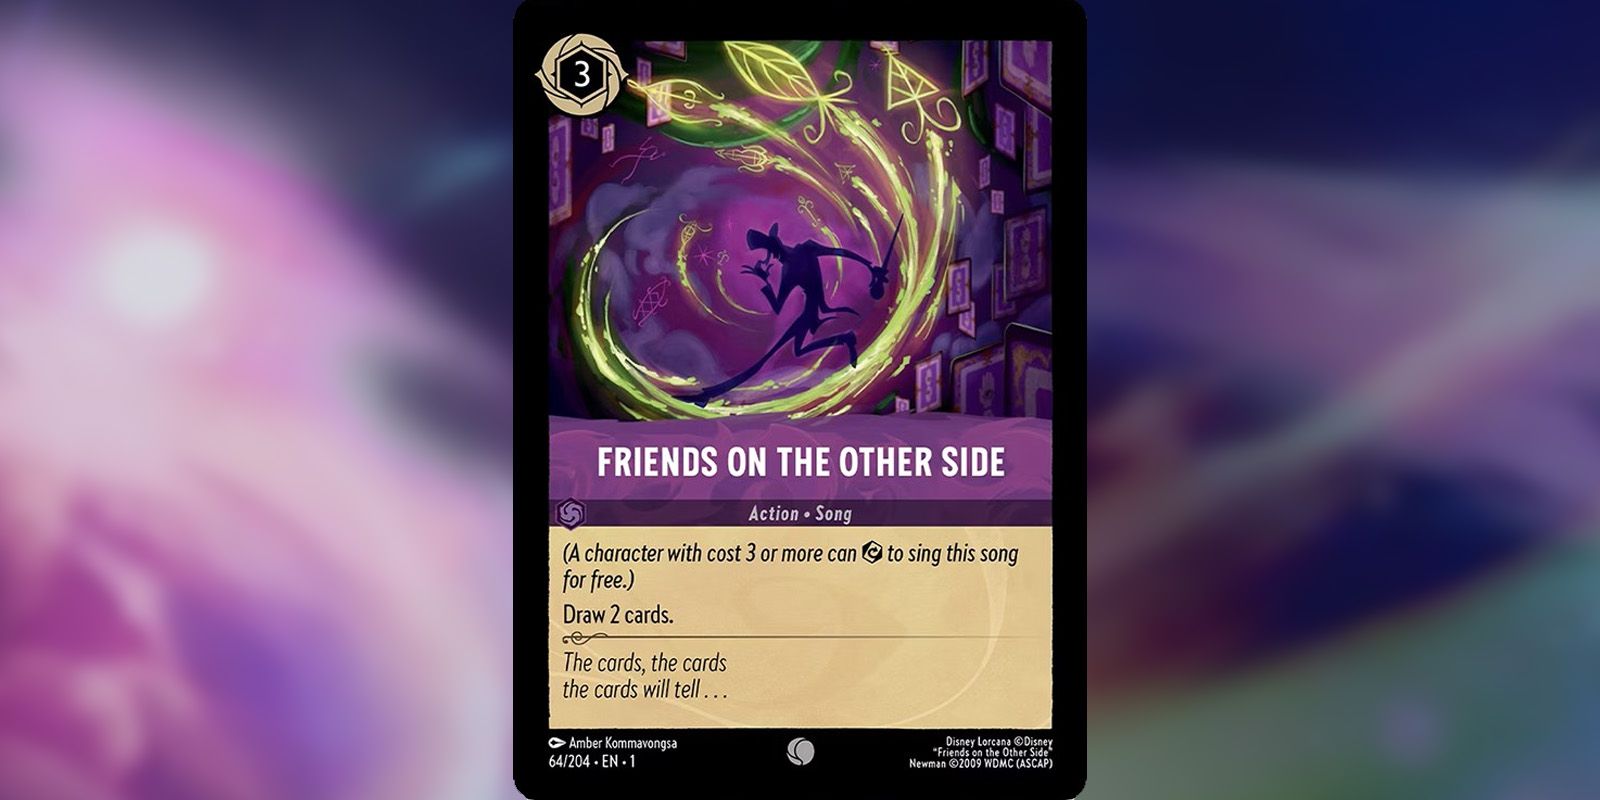 Friends On The Other Side Lorcana song card showing Dr. Facilier.